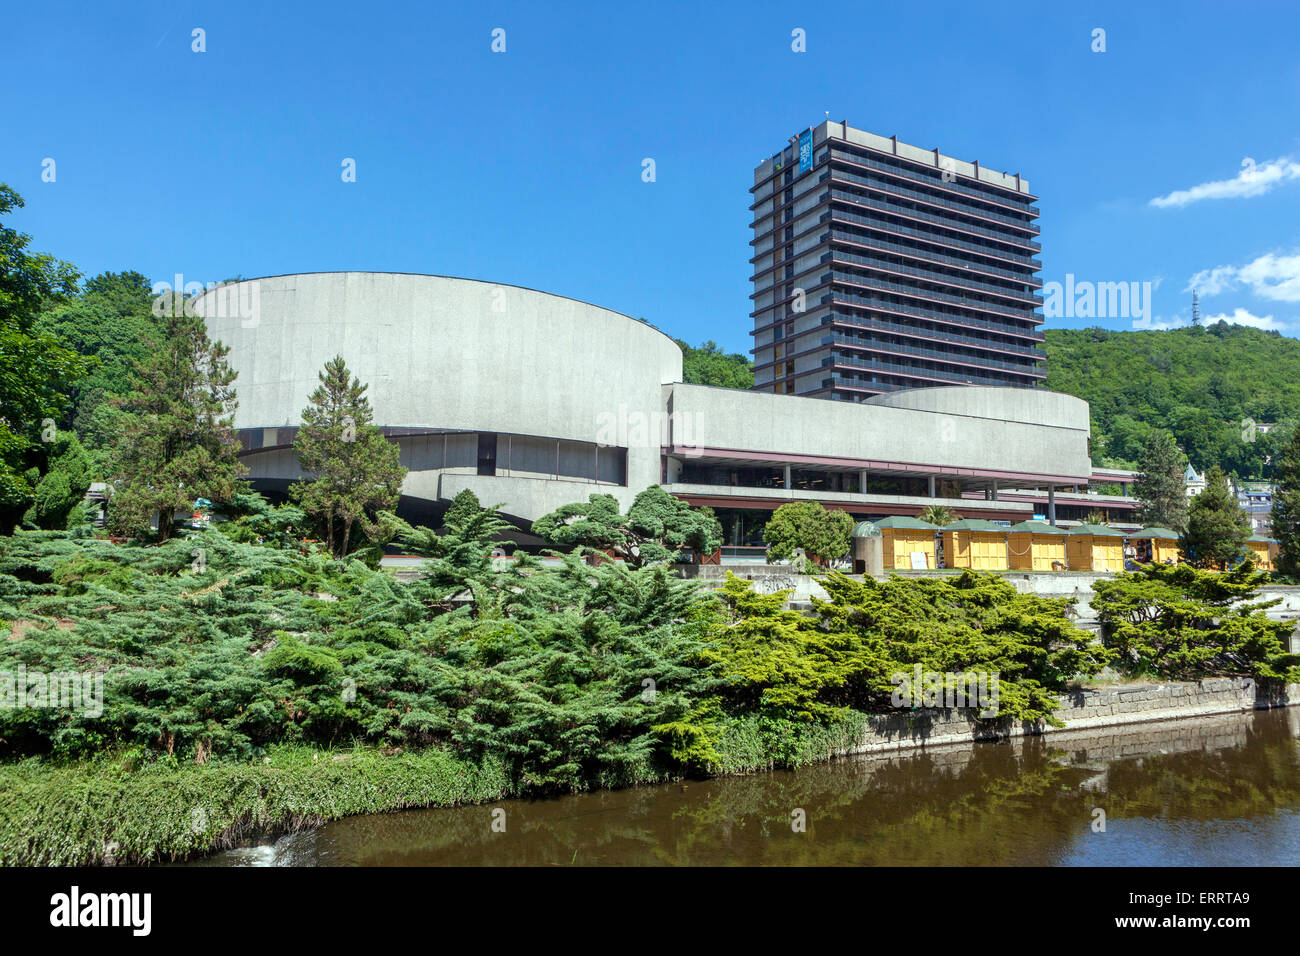 Karlovy Vary Hotel Thermal Czech Republic at Tepla River Brutalist architecture Stockfoto